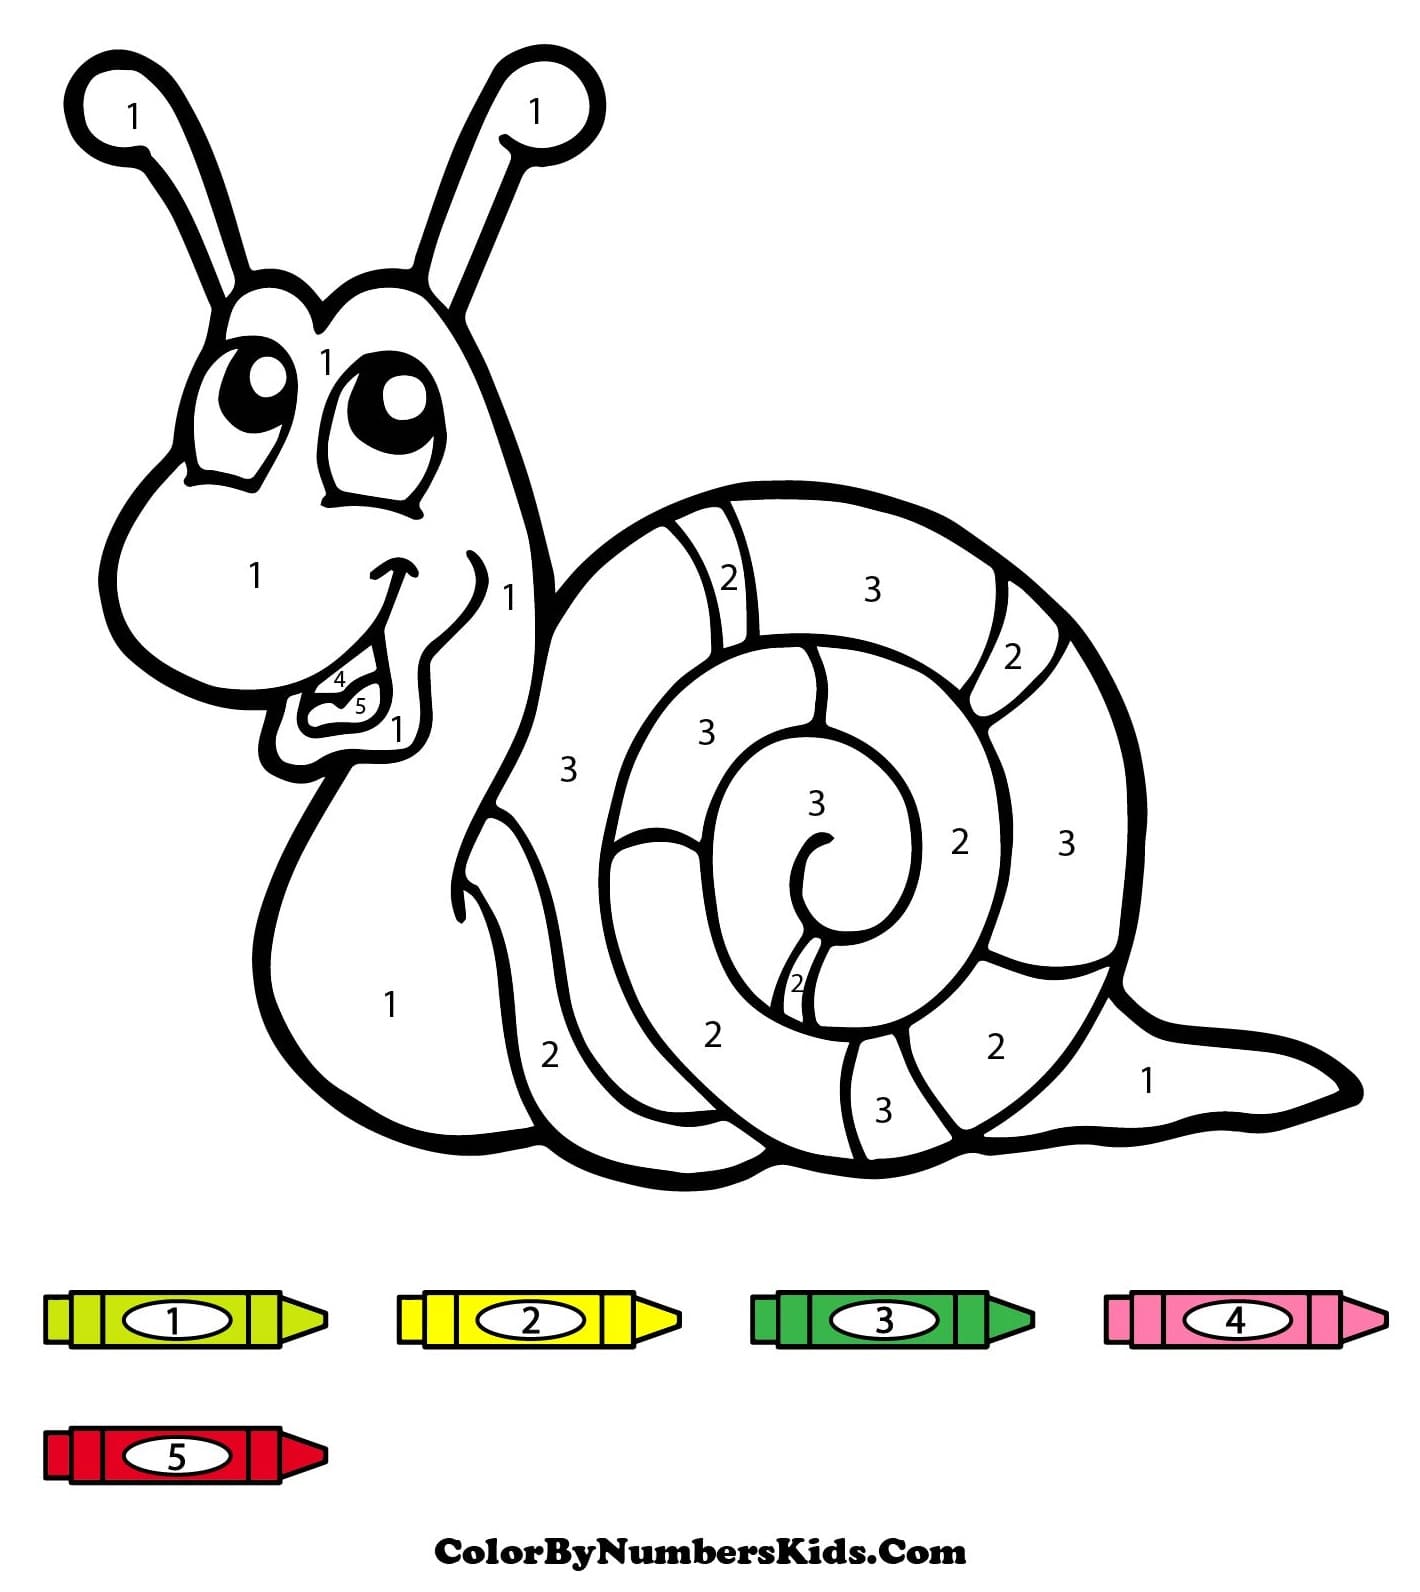 Cartoon Snail Color By Number